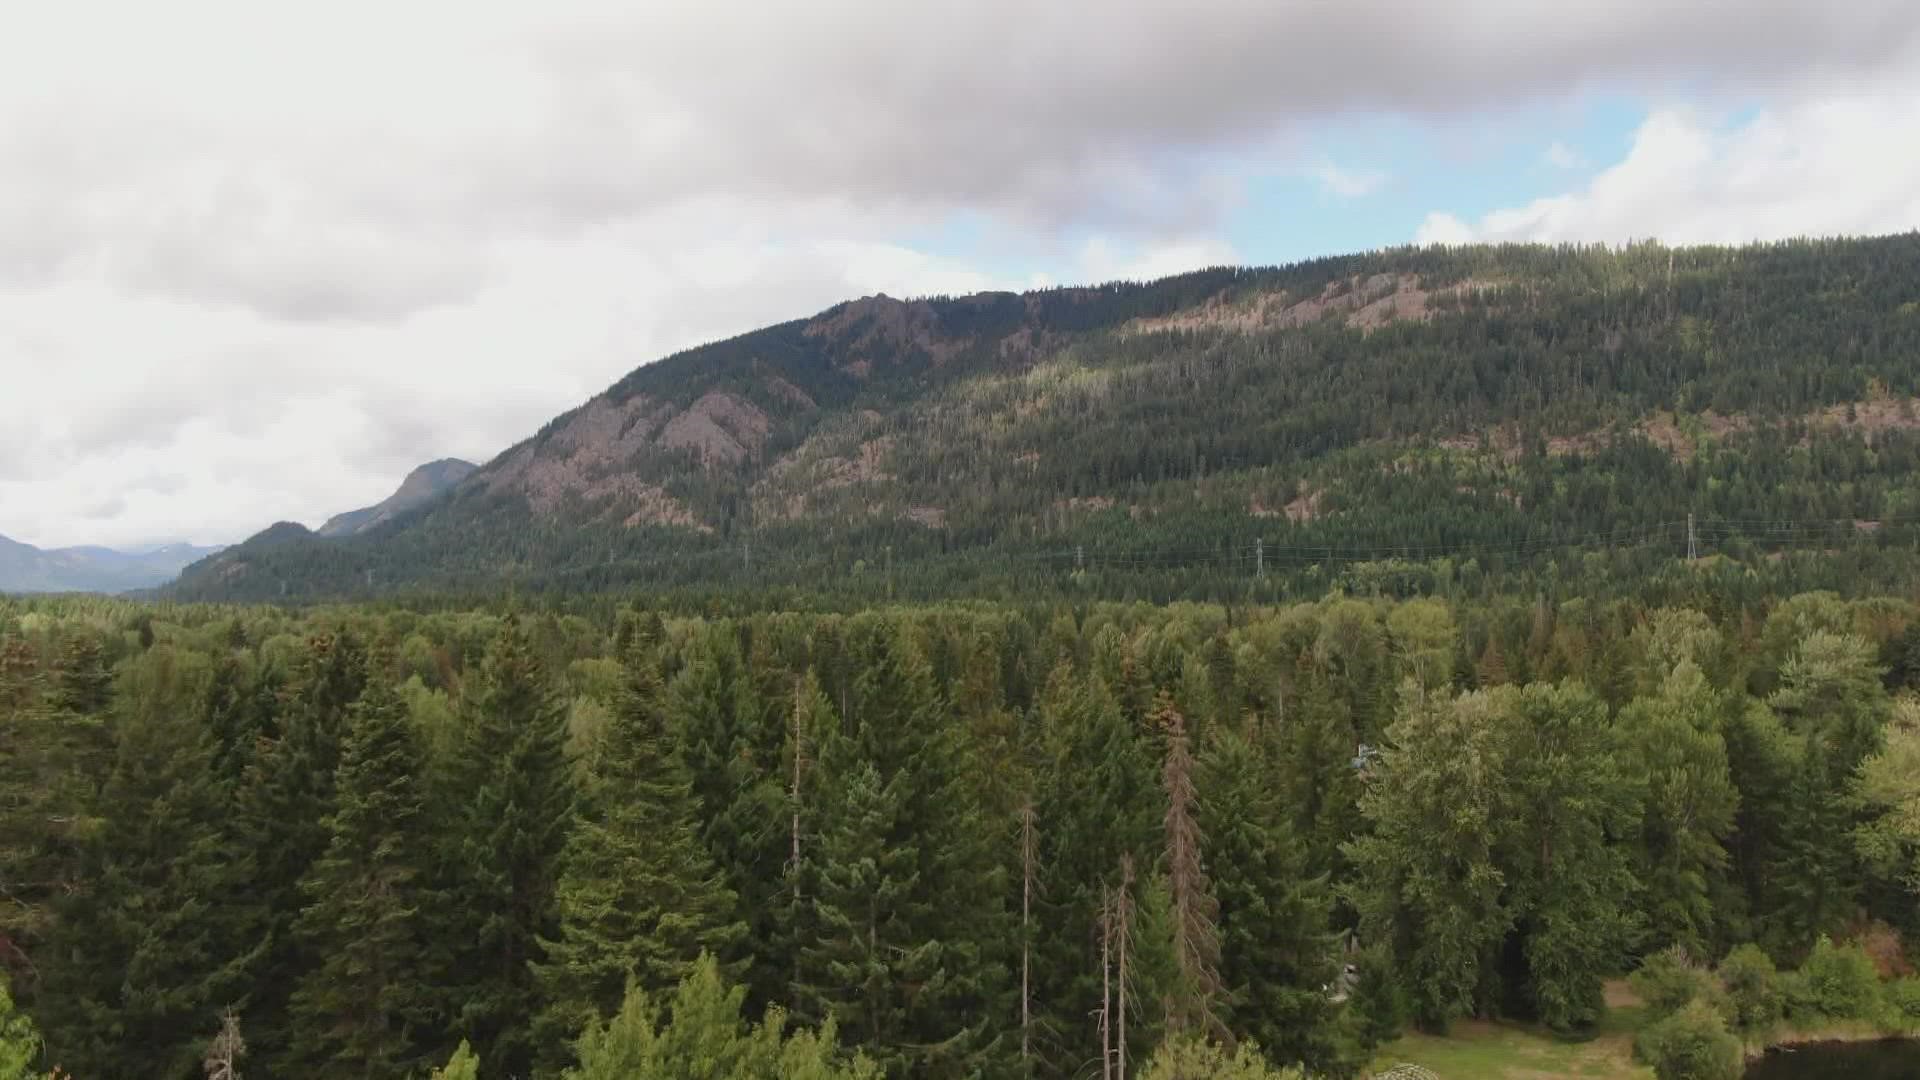 All recreational lands east of the Cascades have reopened to hunting, recreation and camping as incoming rain can help bring an end to wildfire danger